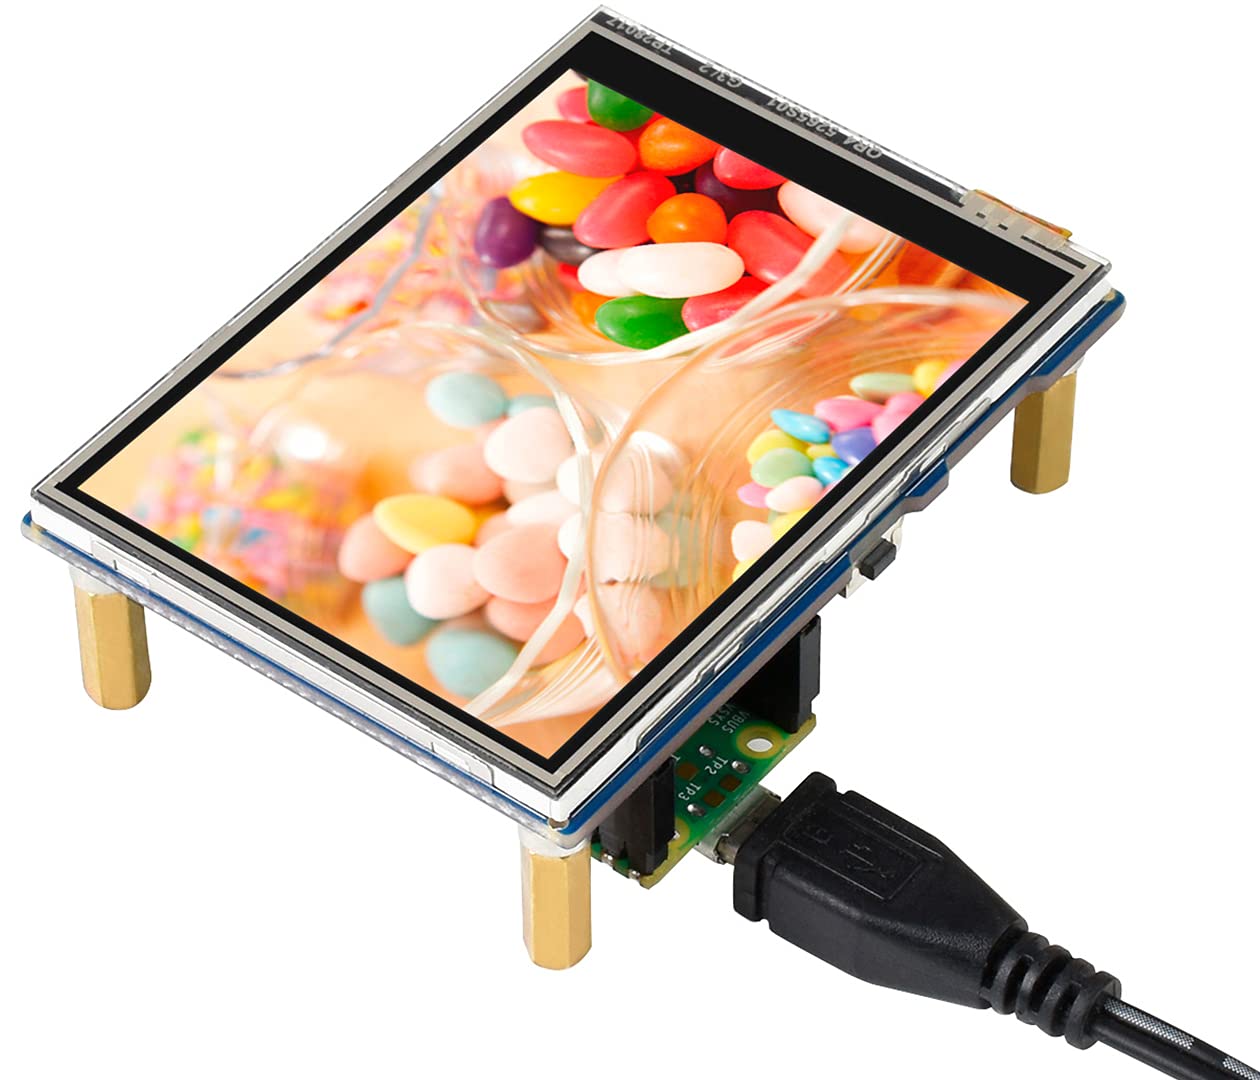 Bicool 2.8inch Resistive Touch Display Module for Raspberry Pi Pico, 320×240 Pixels IPS LCD Screen,Touch Controller XPT2046, ST7789 Driver, SPI Interface, 262K Display Color